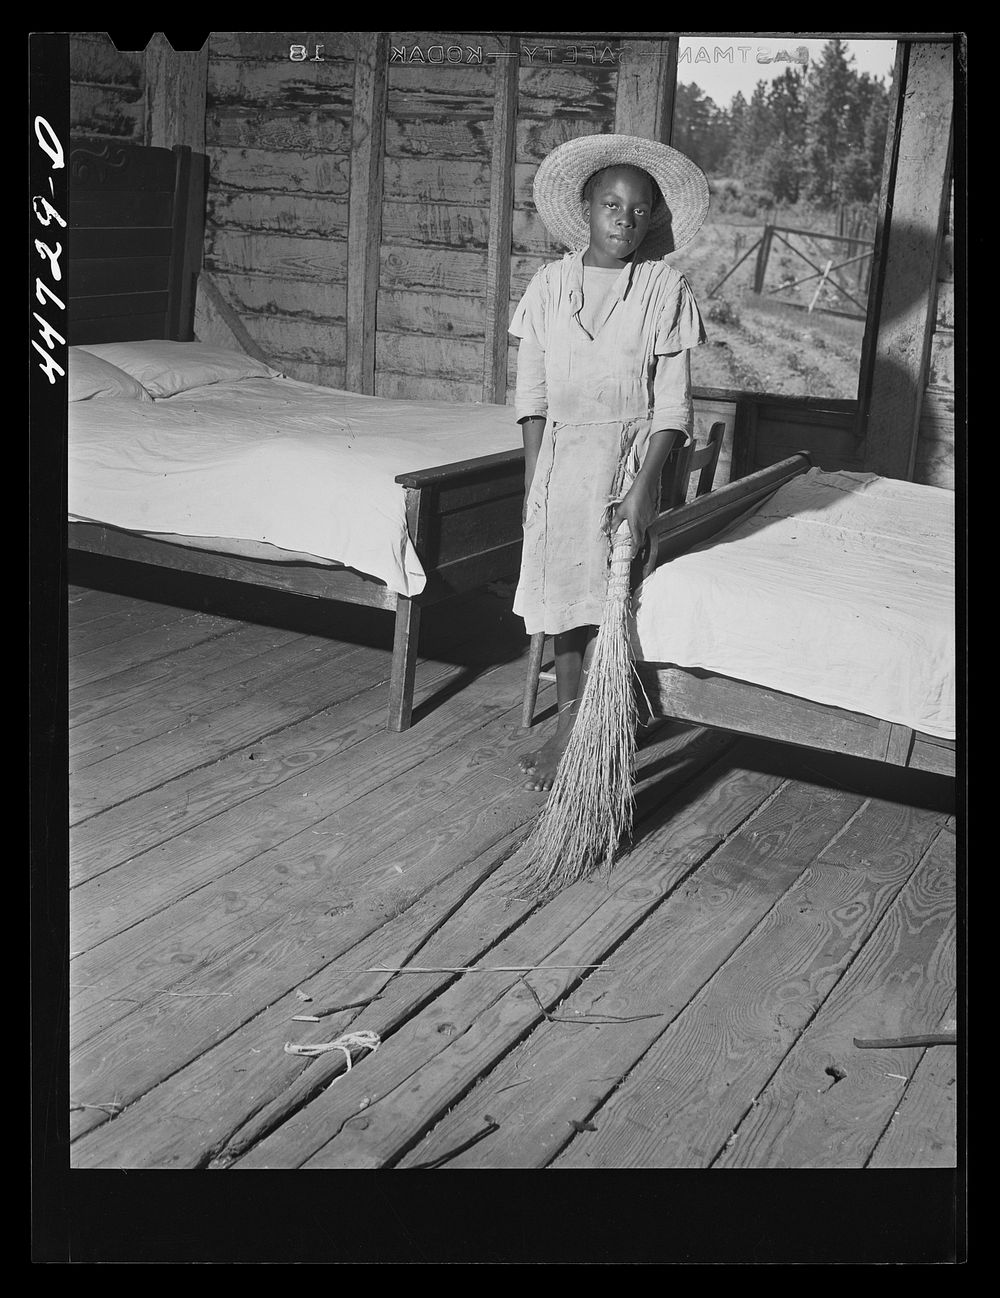 Daughter of Mr. Frank Champian, FSA (Farm Security Administration) borrower, sweeping up. Near White Plains, Greene County…